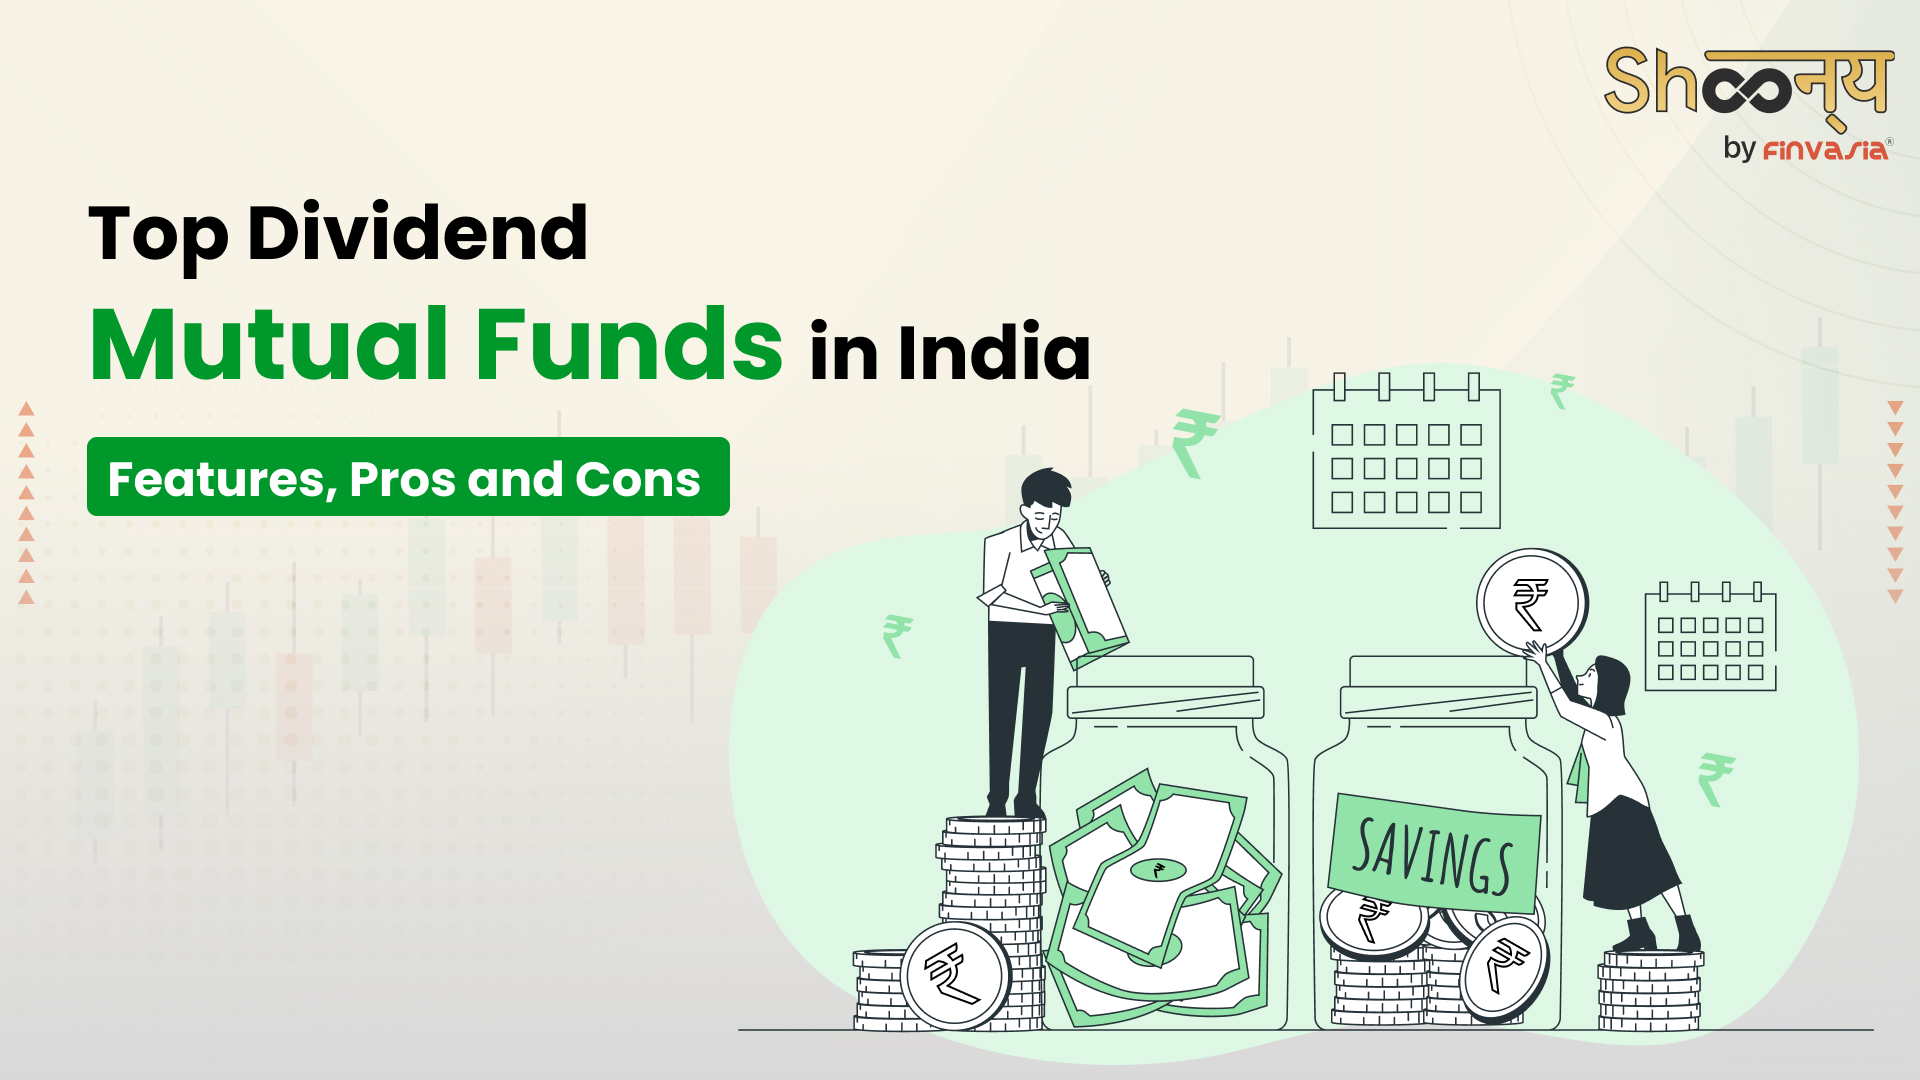 Invest with Confidence: Best Dividend Mutual Funds India